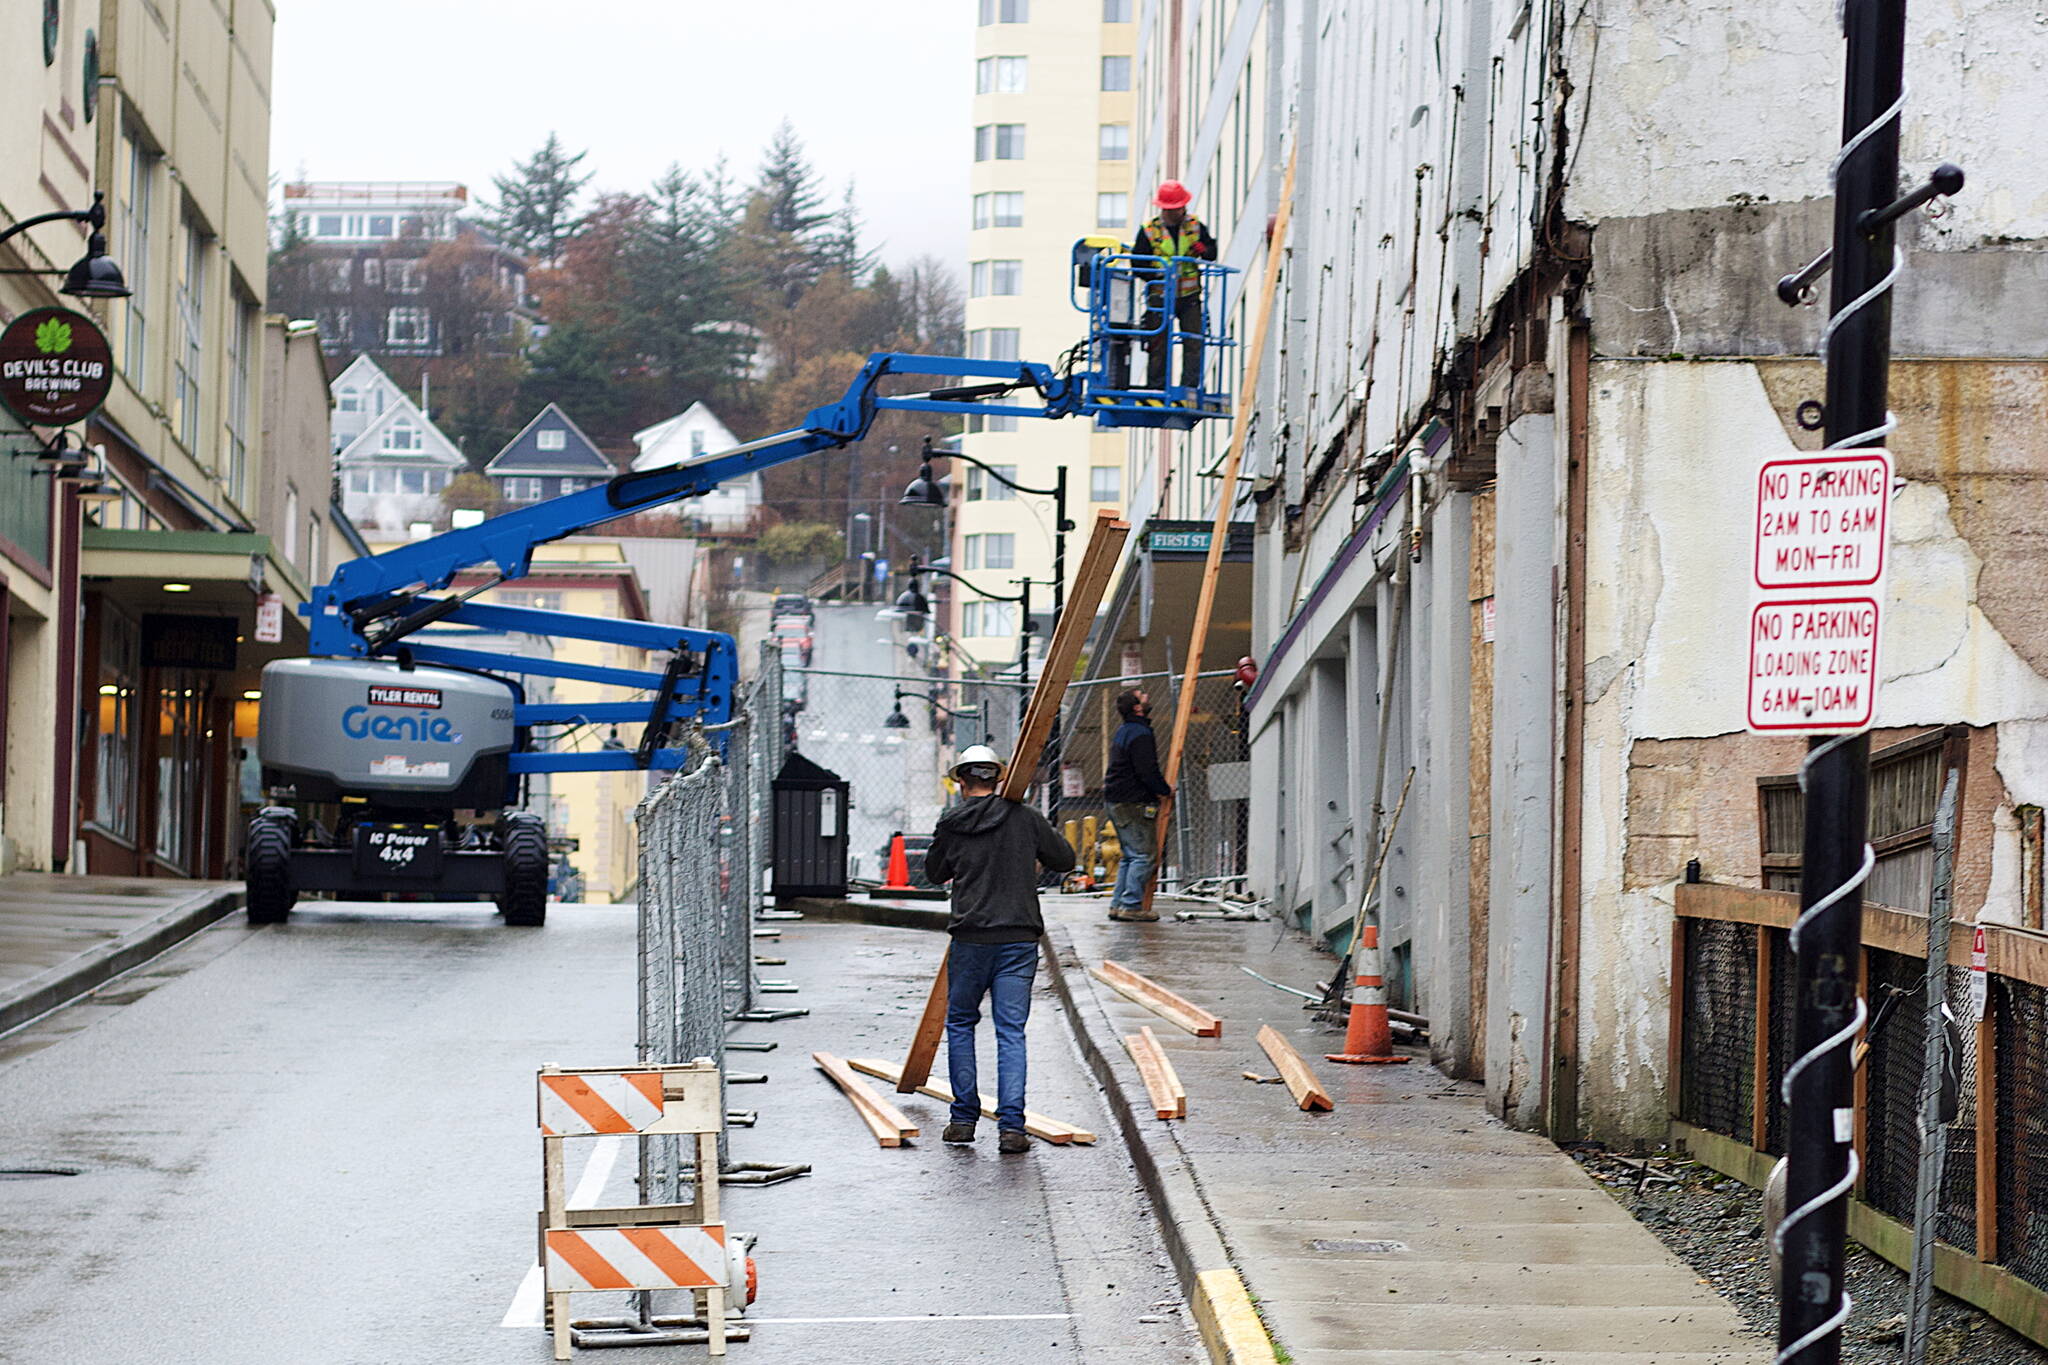 Workers remove awning from the old Elks Lodge building at 109 S. Franklin St. at midday Monday. While heavy construction equipment is parked next to the structure, the owner says no decision about the fate of the building has been made yet. (Mark Sabbatini / Juneau Empire)